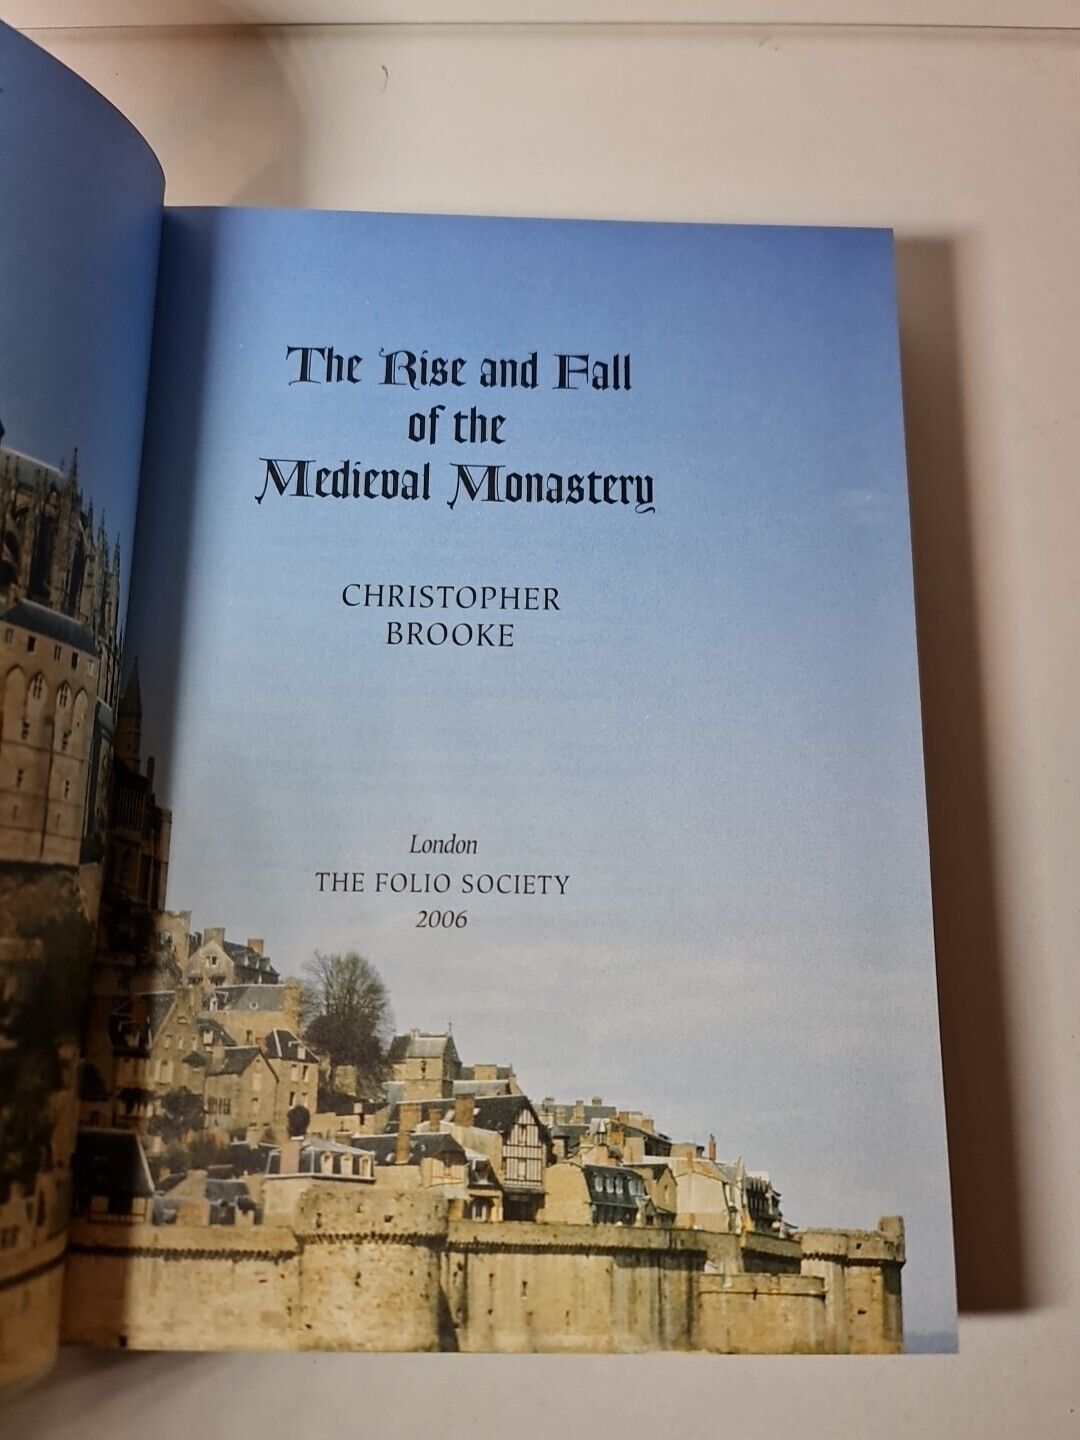 Folio Society- The Rise and Fall of the Medieval Monastery by C Brooke (2006)